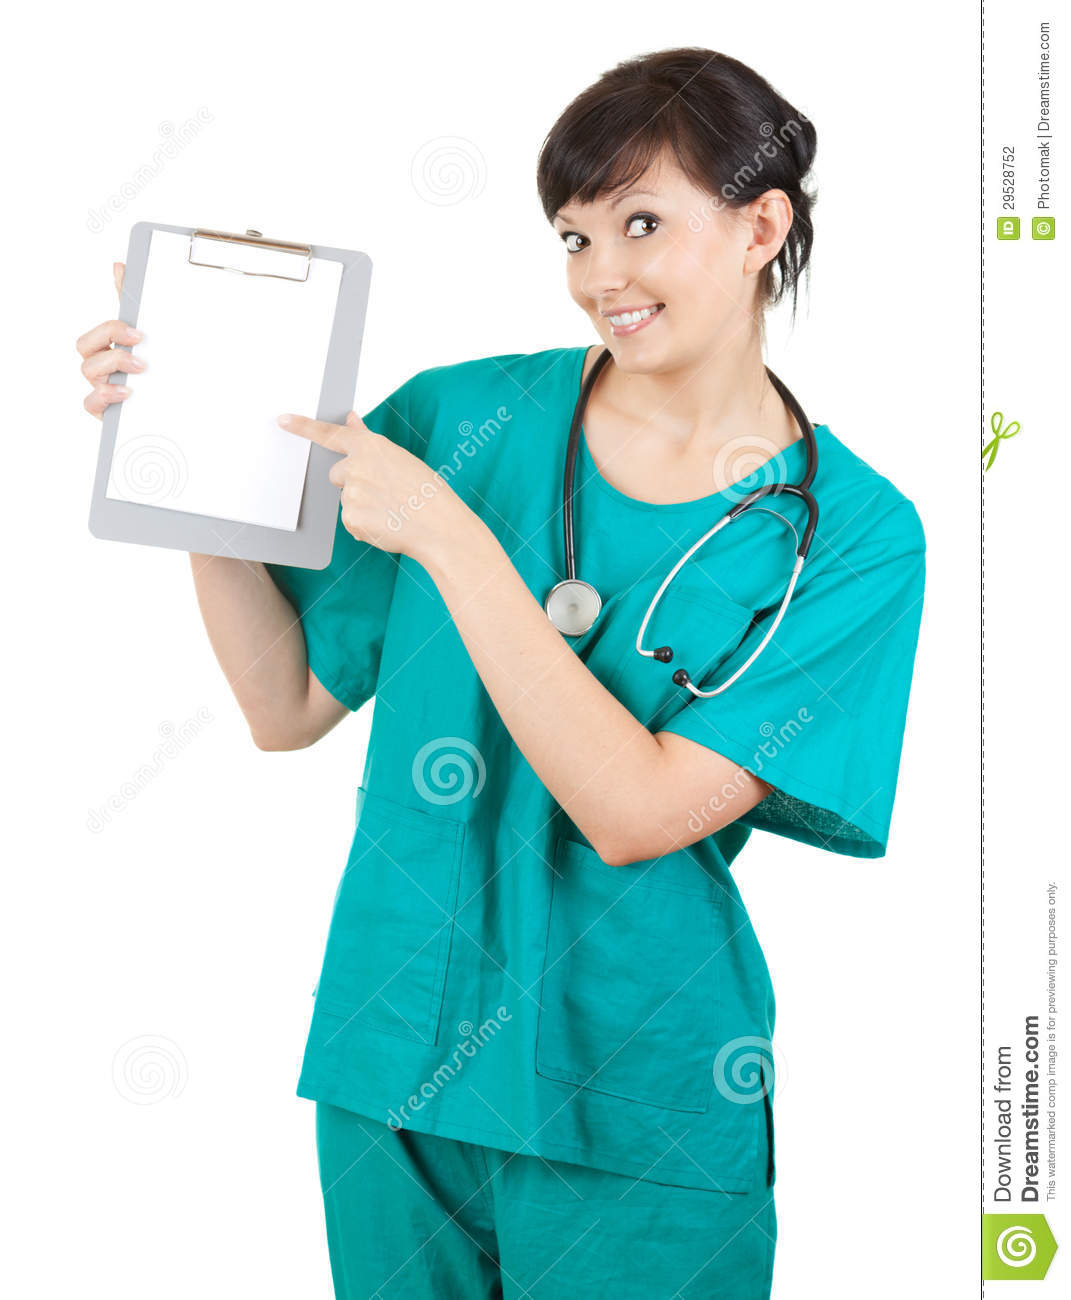 Health Care Worker Woman Pointing To Blank Sign Stock Photography